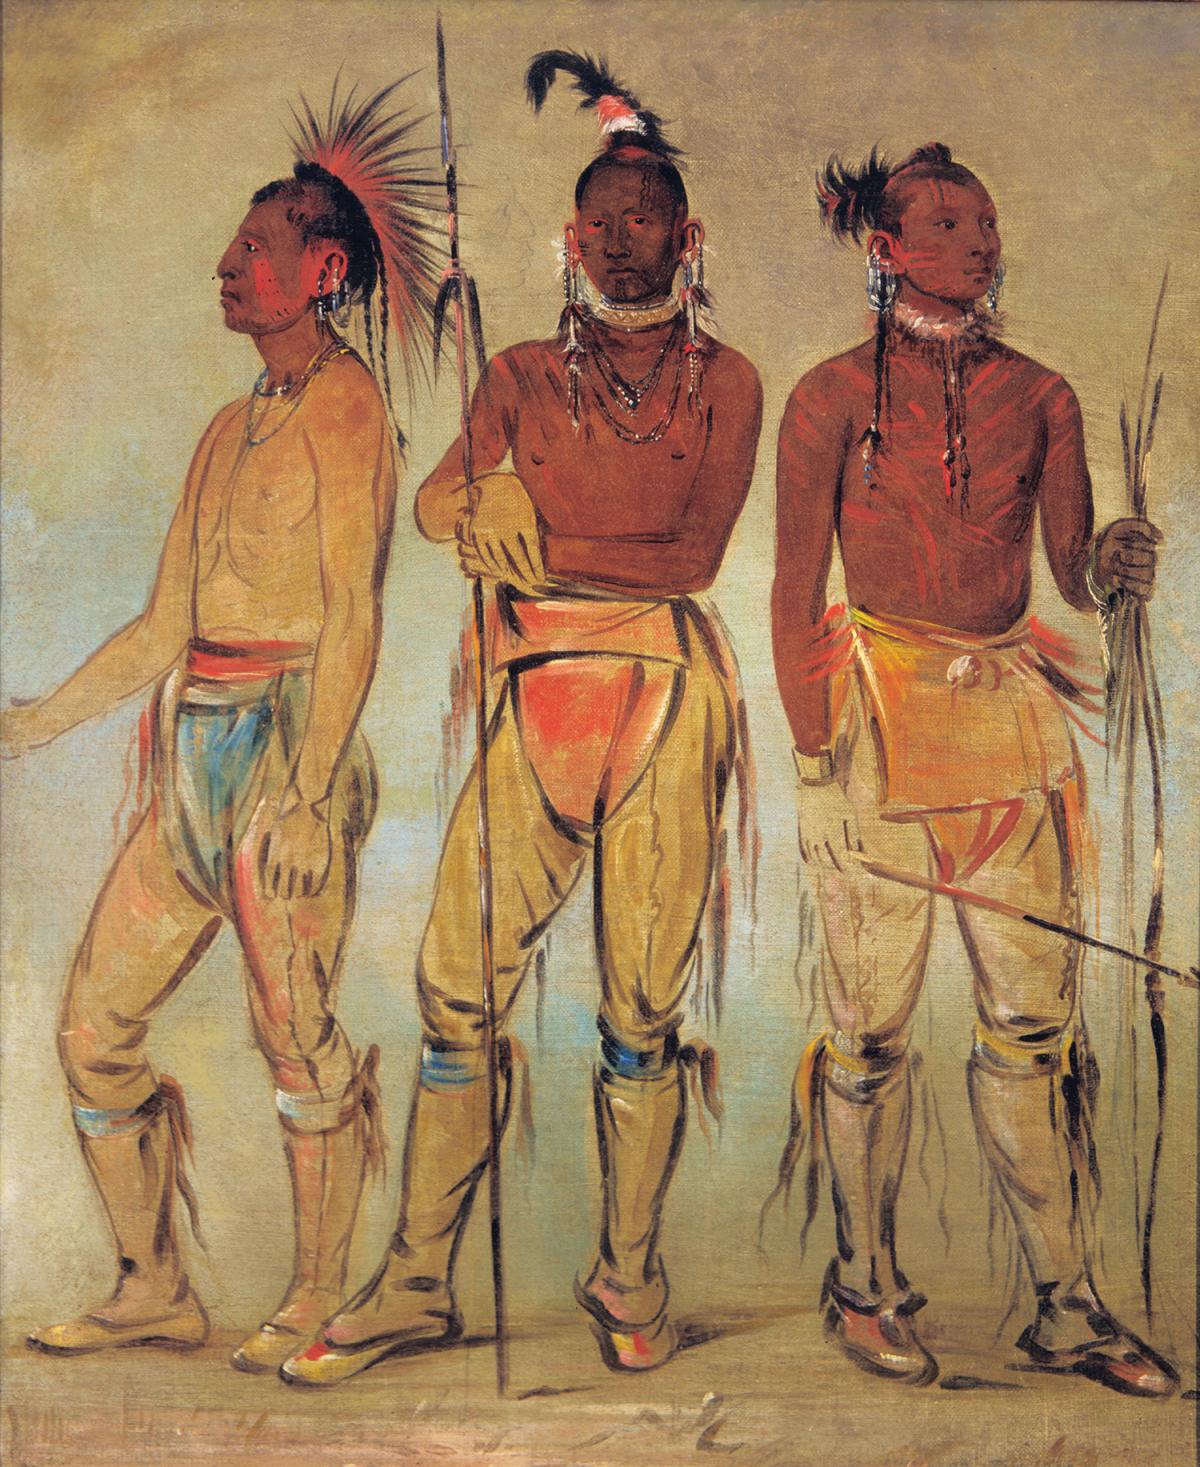 Three osage warriors, holding spears, wearing loincloths, sandals and feathered headbands